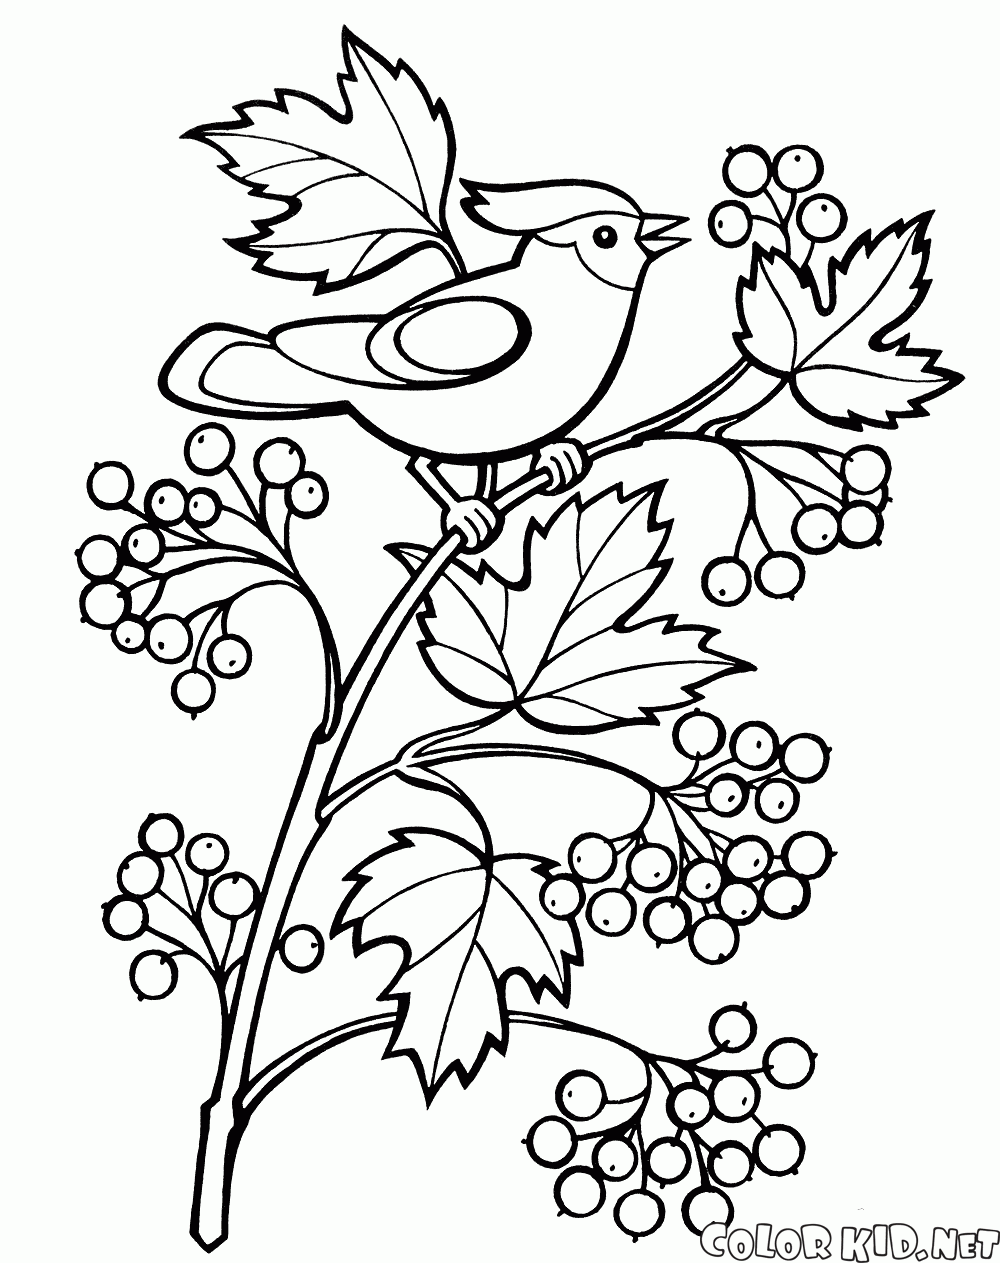 Coloring page - Berries